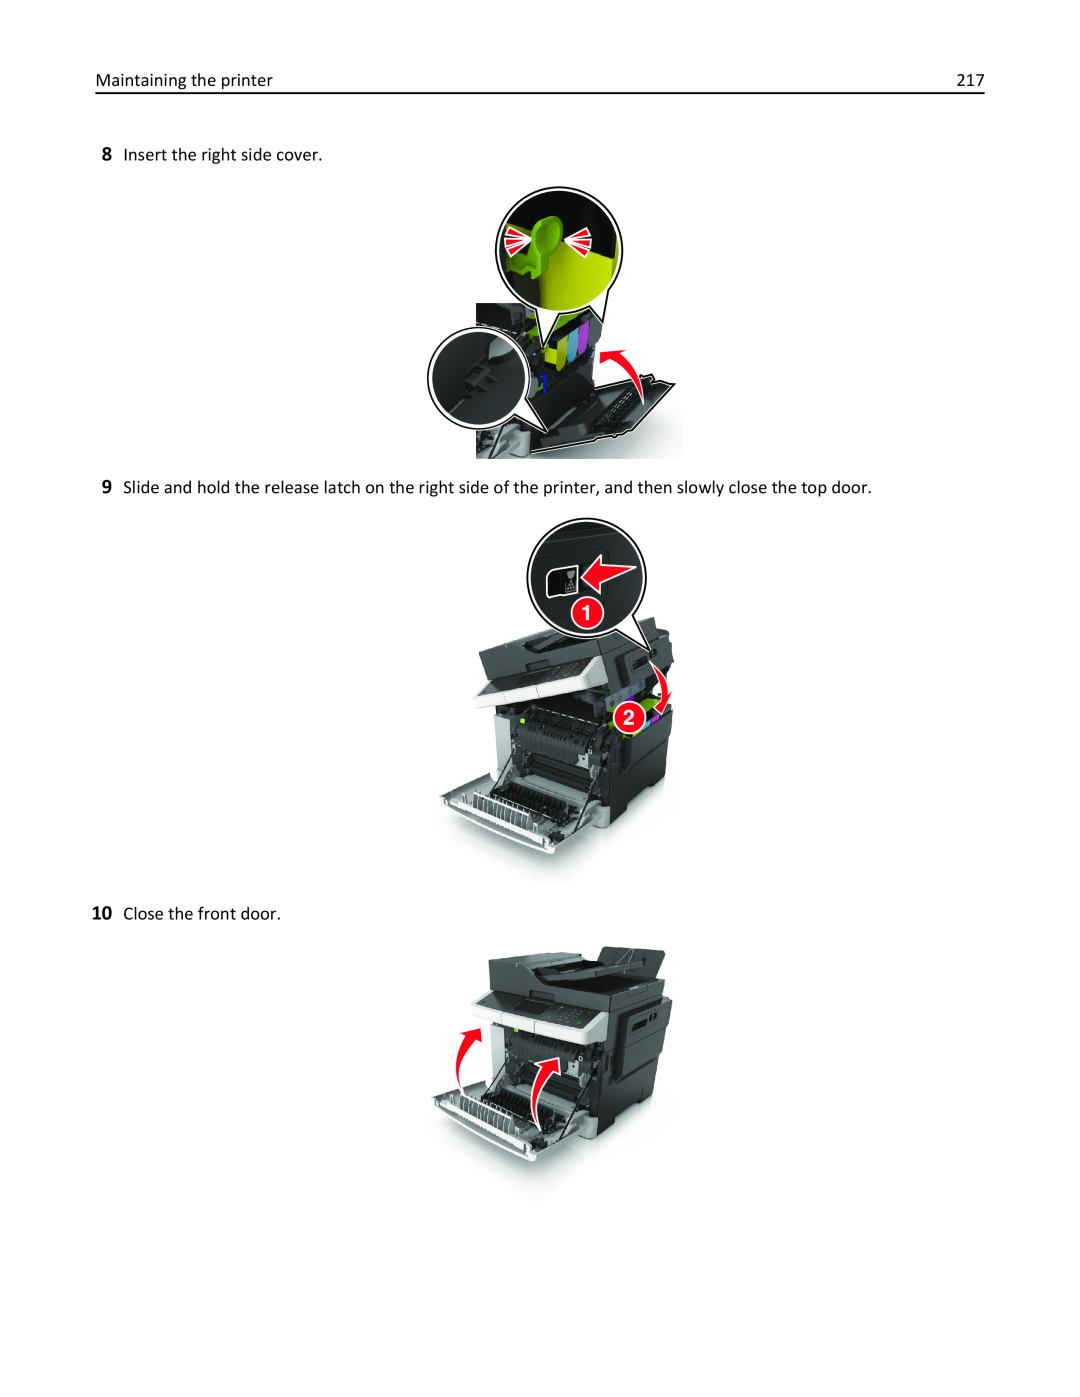 Lexmark 436 manual Maintaining the printer, Insert the right side cover, Close the front door 